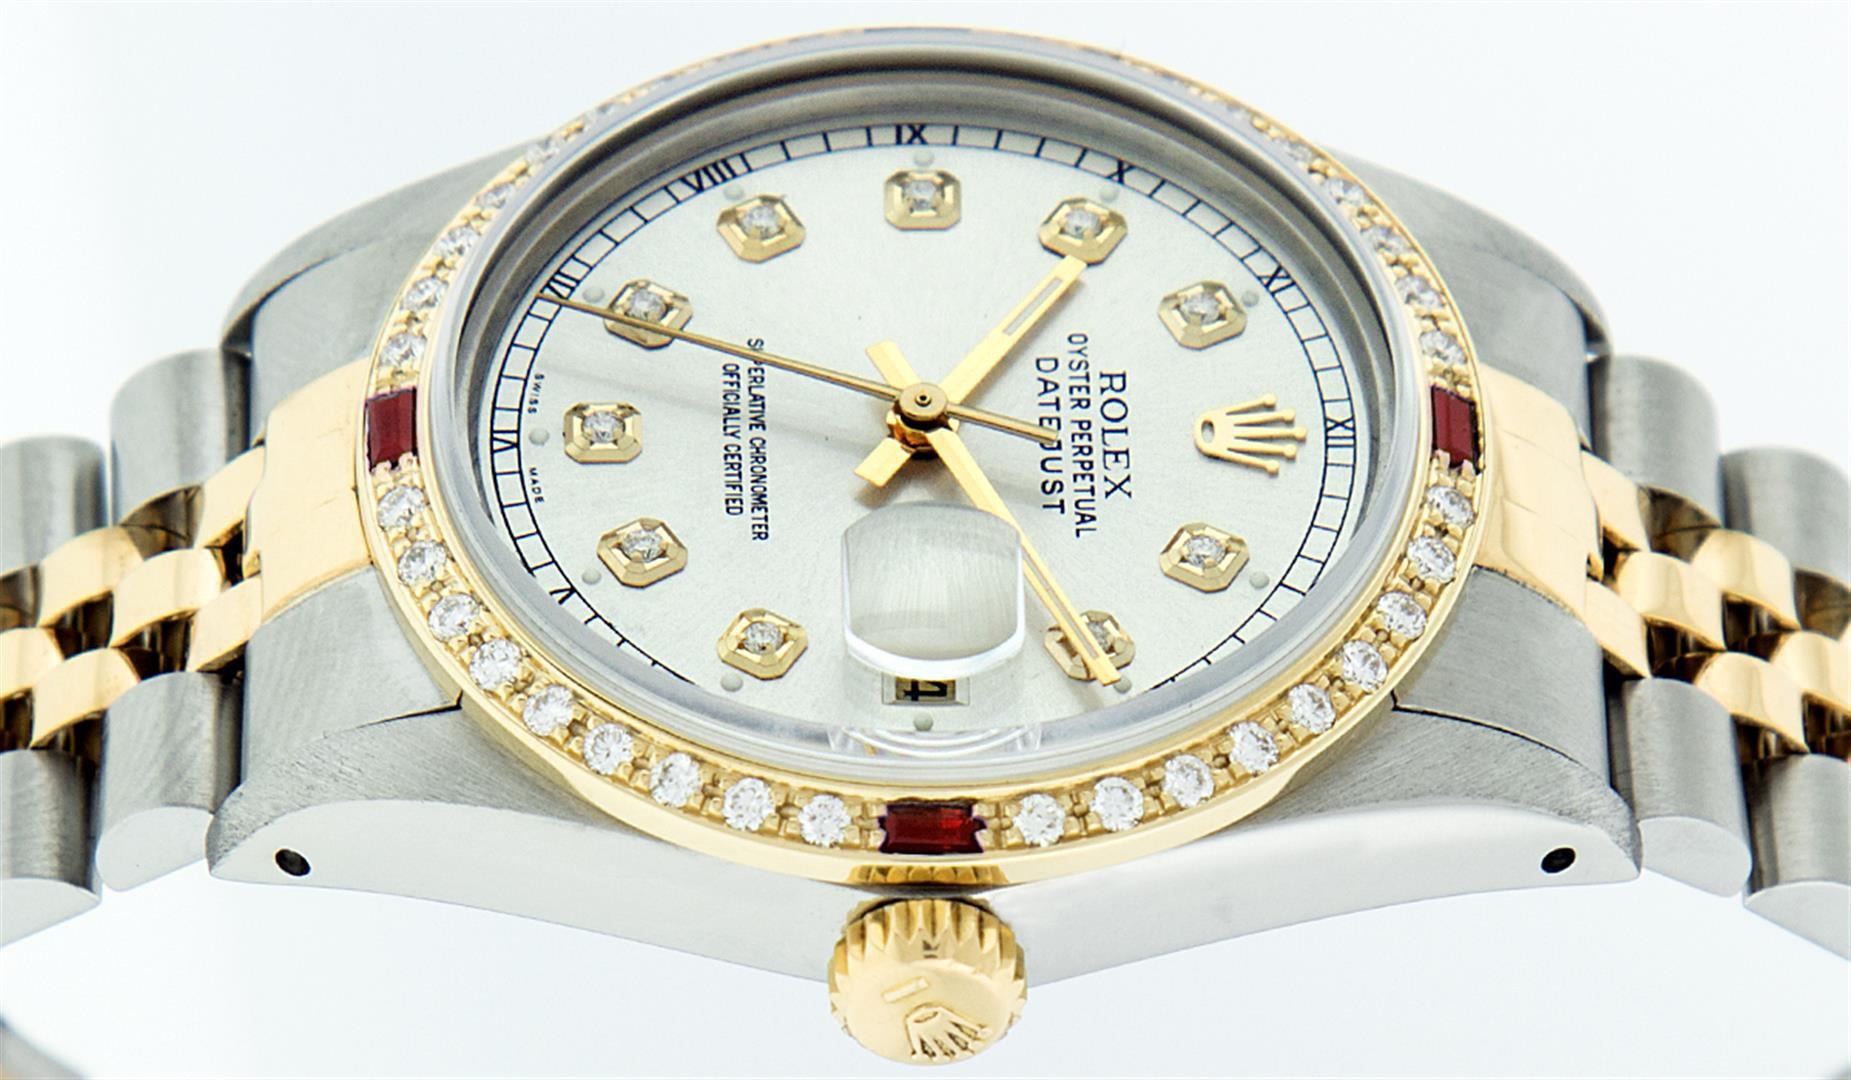 Rolex Two Tone Ruby and Diamond DateJust Men's Watch